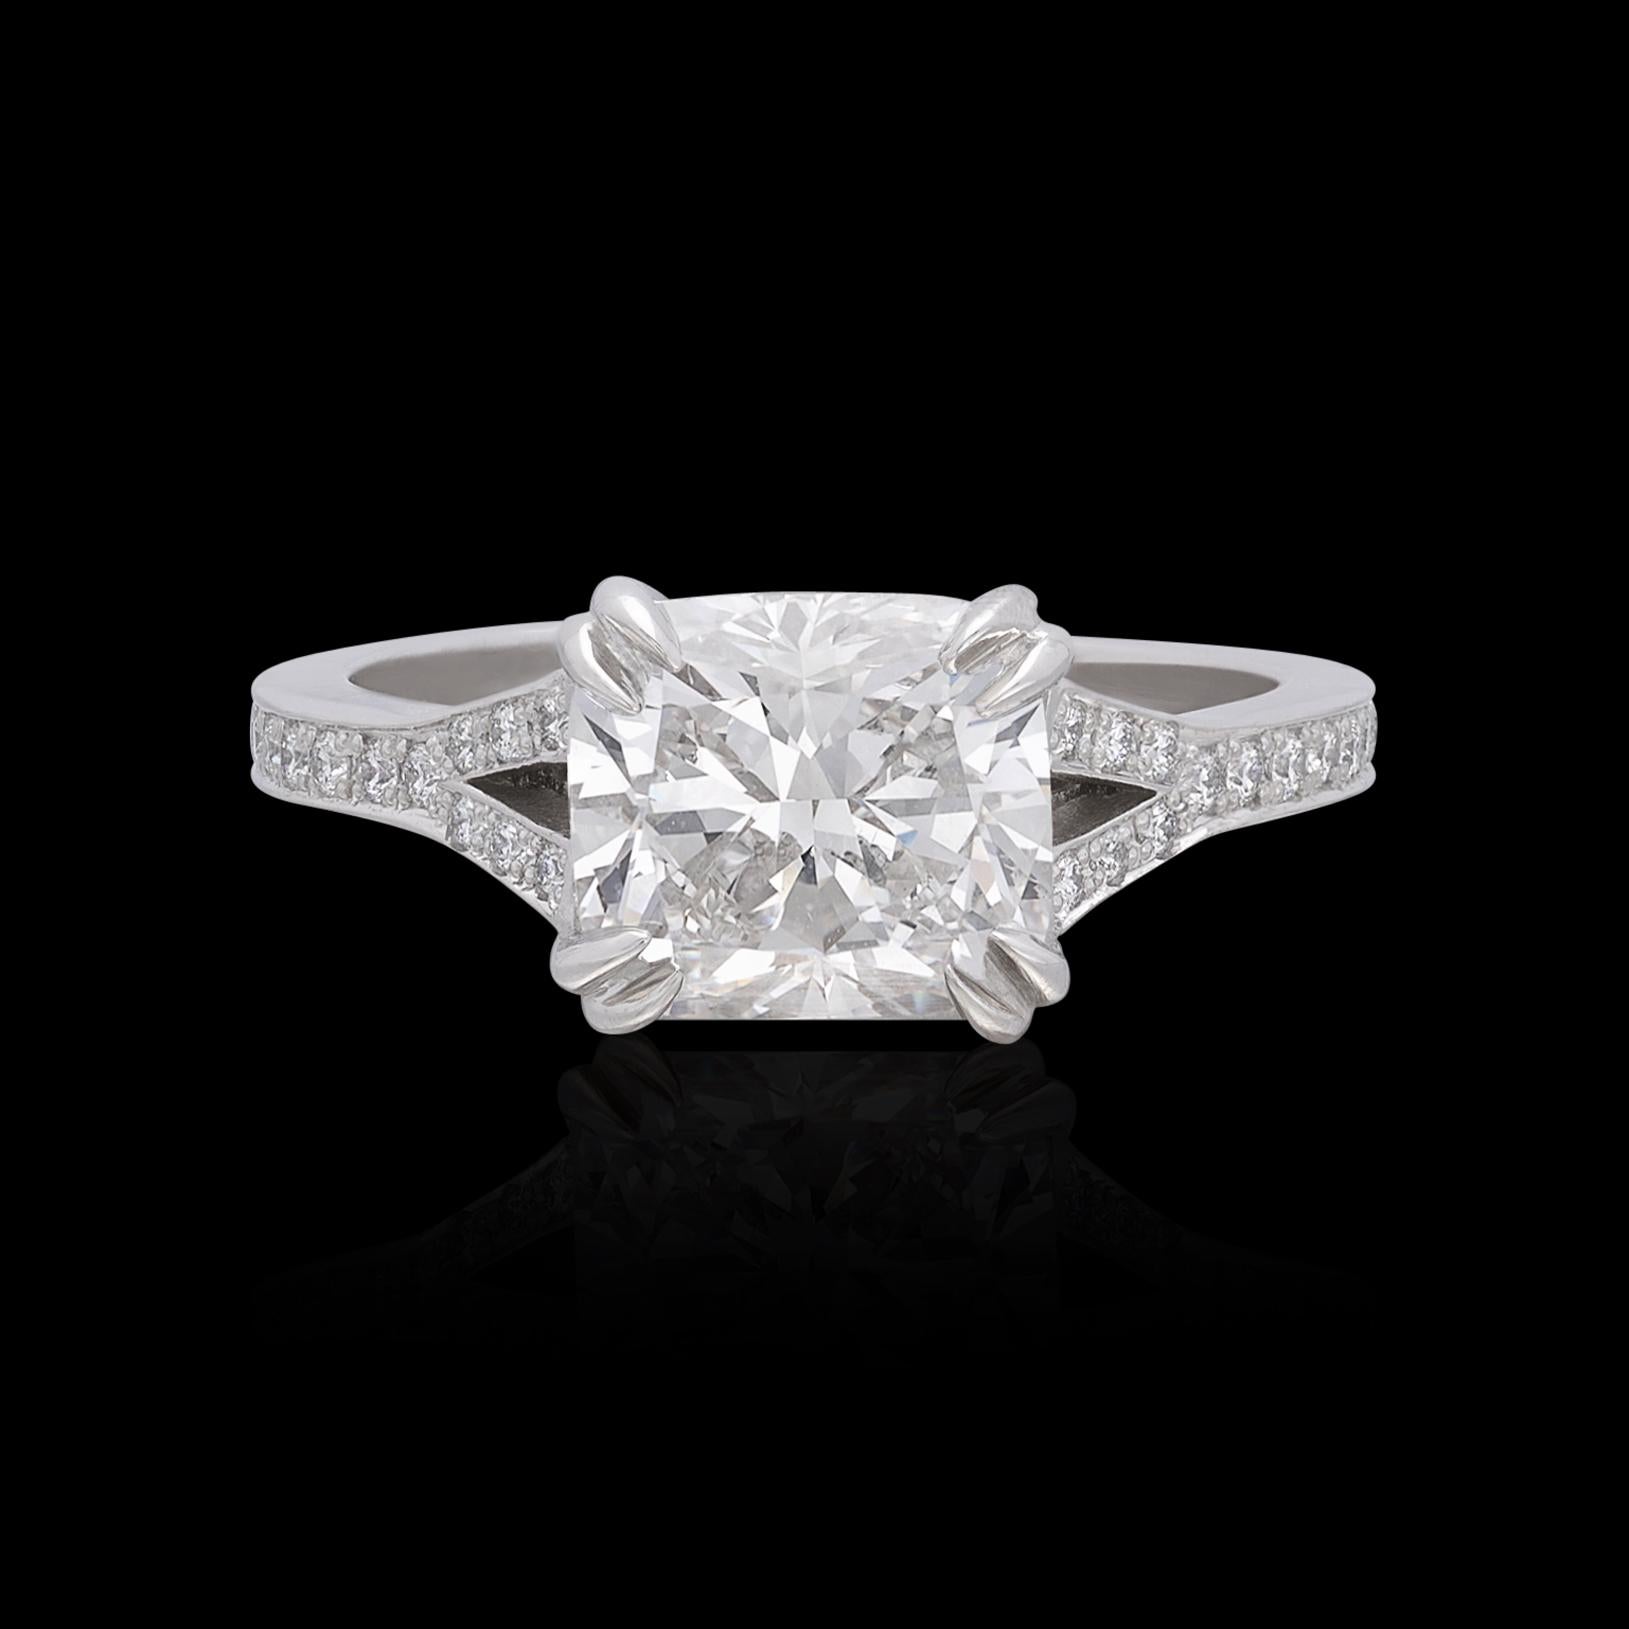 When only the best will do! This extraordinary platinum engagement ring features an eye-catching 2.56 carat Cushion Cut diamond horizontally set in a split shank setting with 32 fine melee diamonds for 0.29 carats. The beautiful center stone has